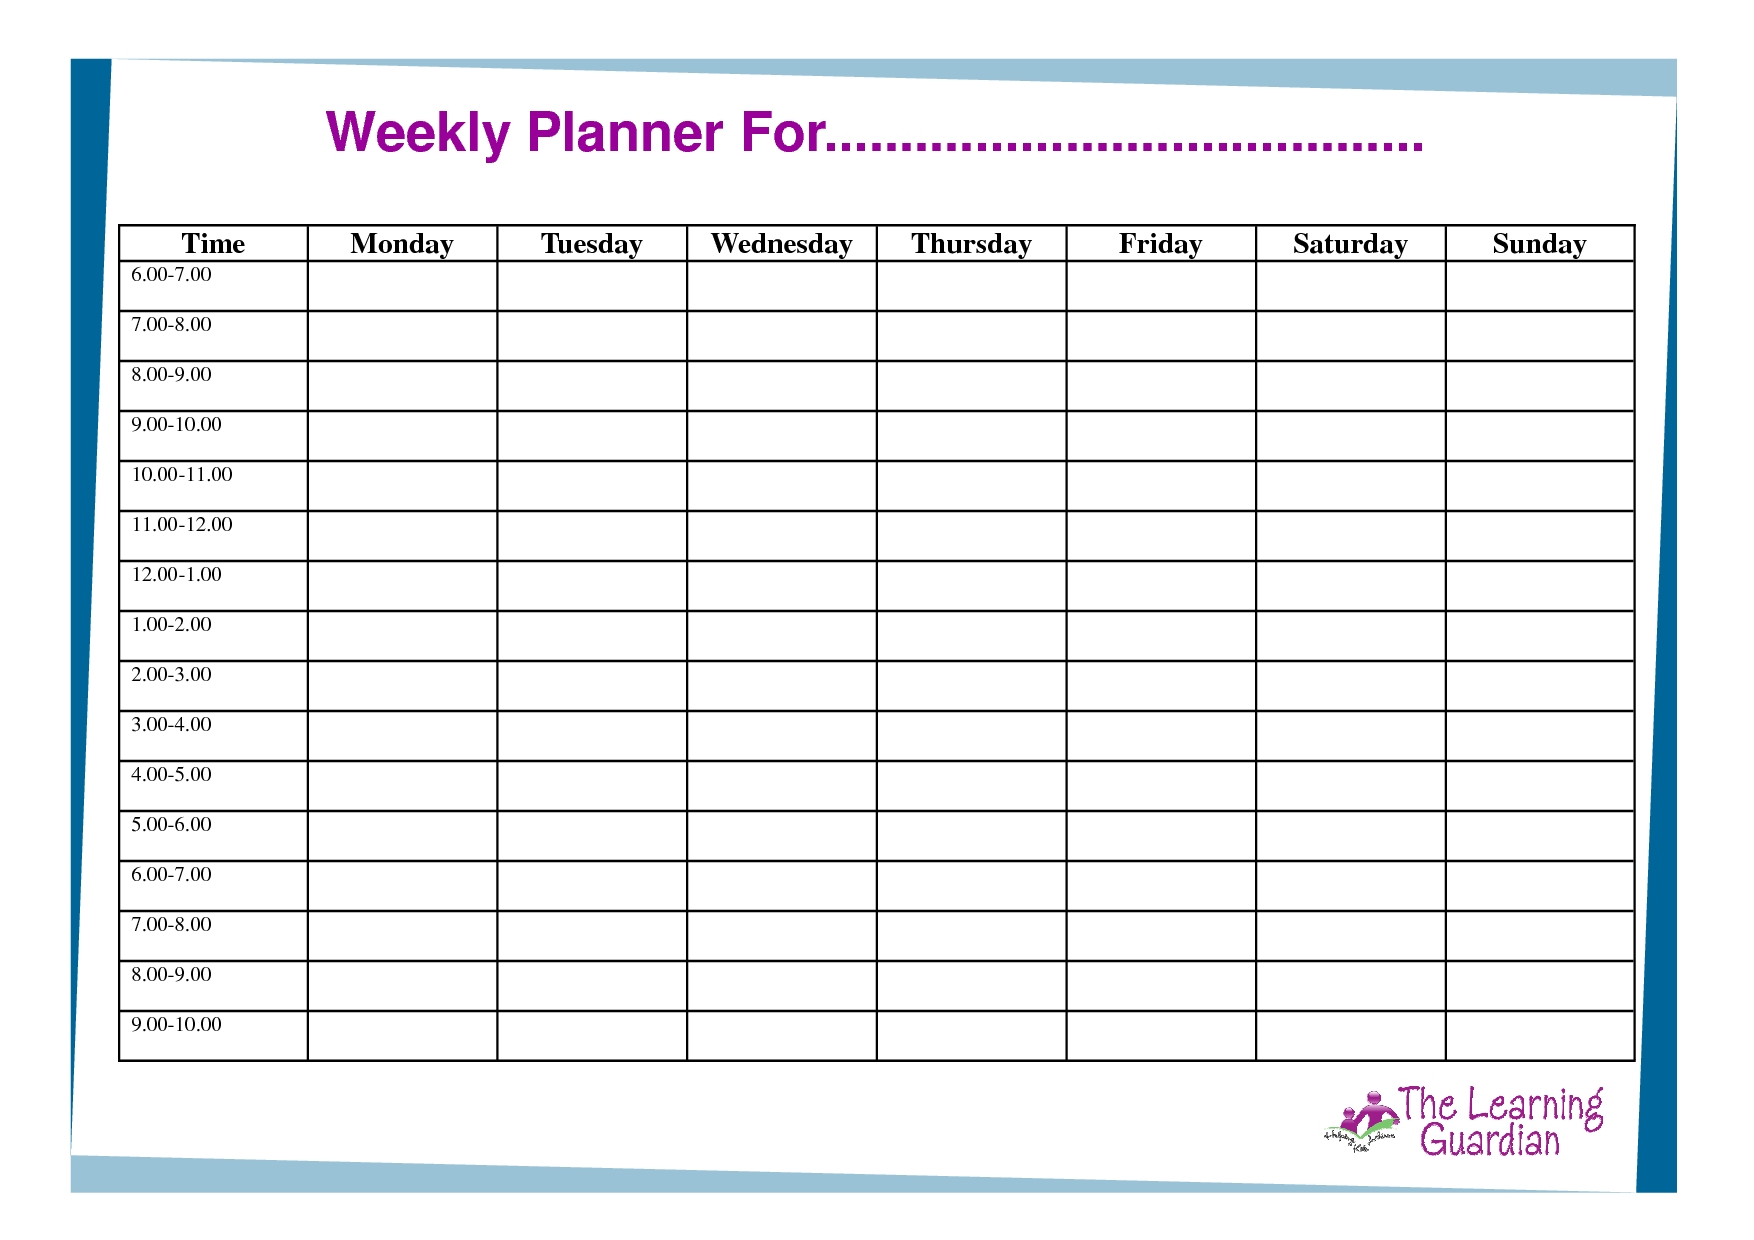 Free Printable Weekly Calendar Templates | Weekly Planner For Time for Monday Through Friday Schedule Template Free